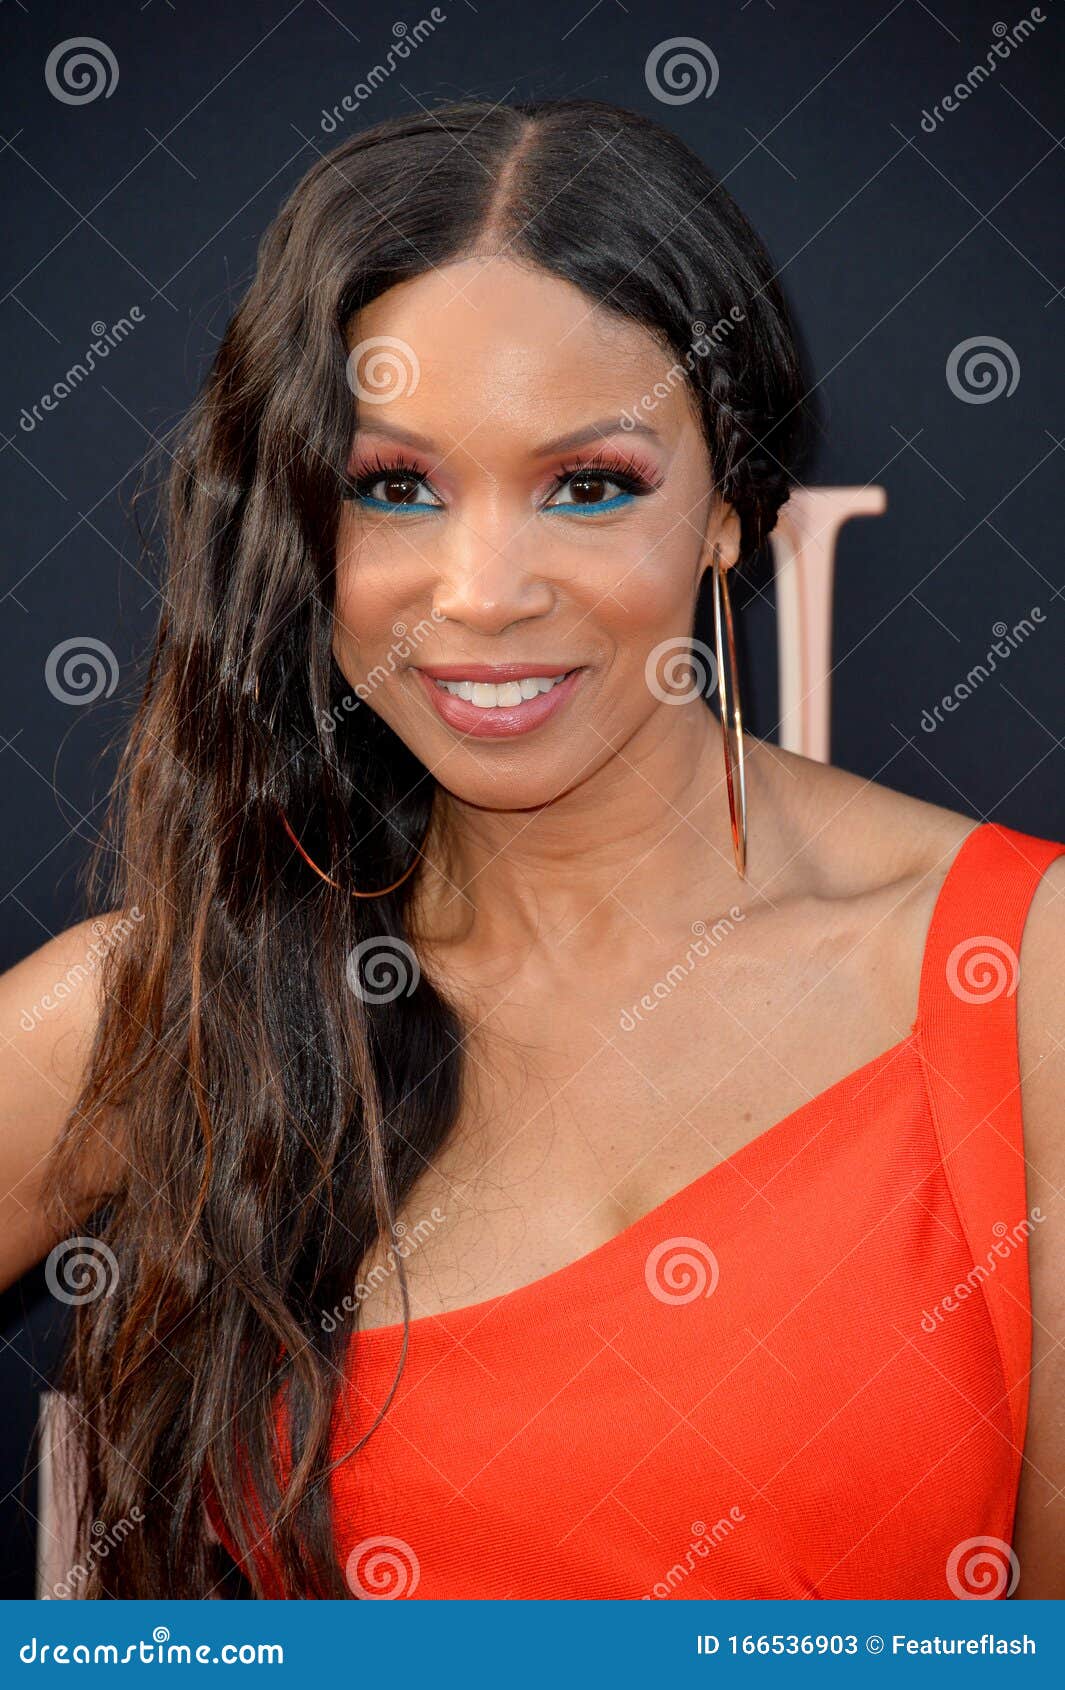 Elise neal pictures